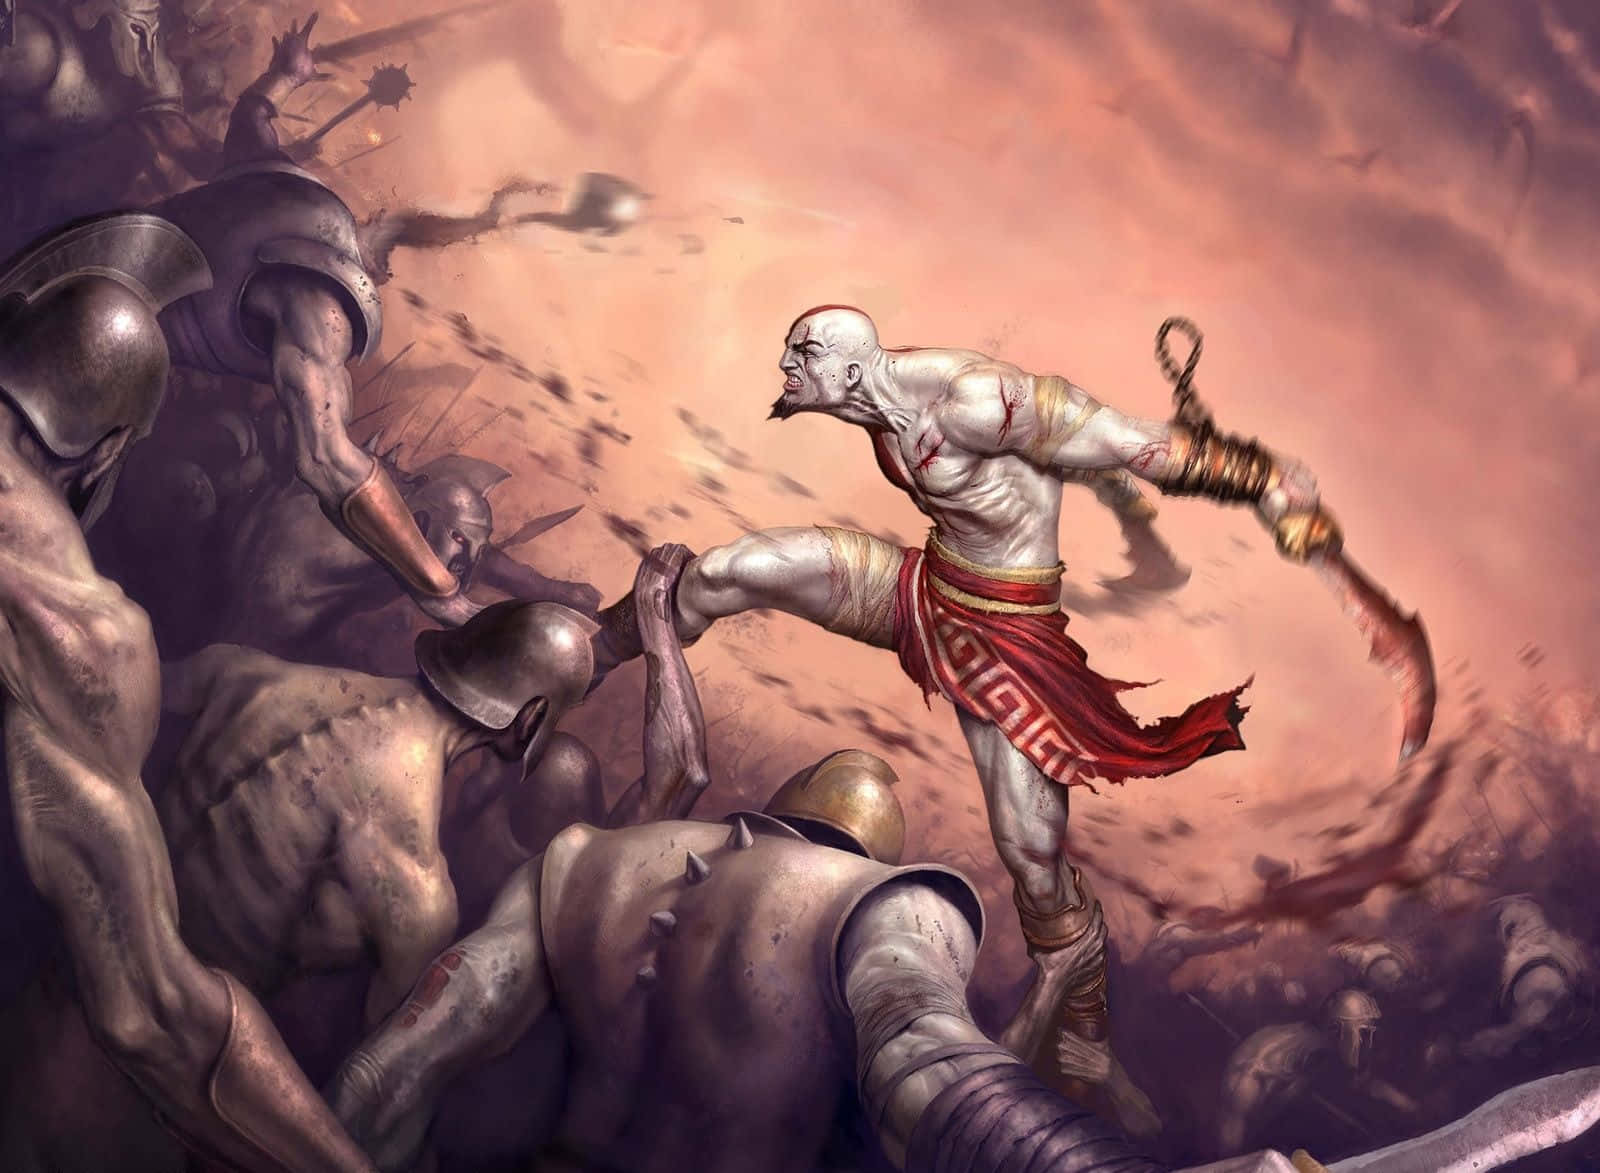 Kratos takes down the gods in God of War 3 Wallpaper